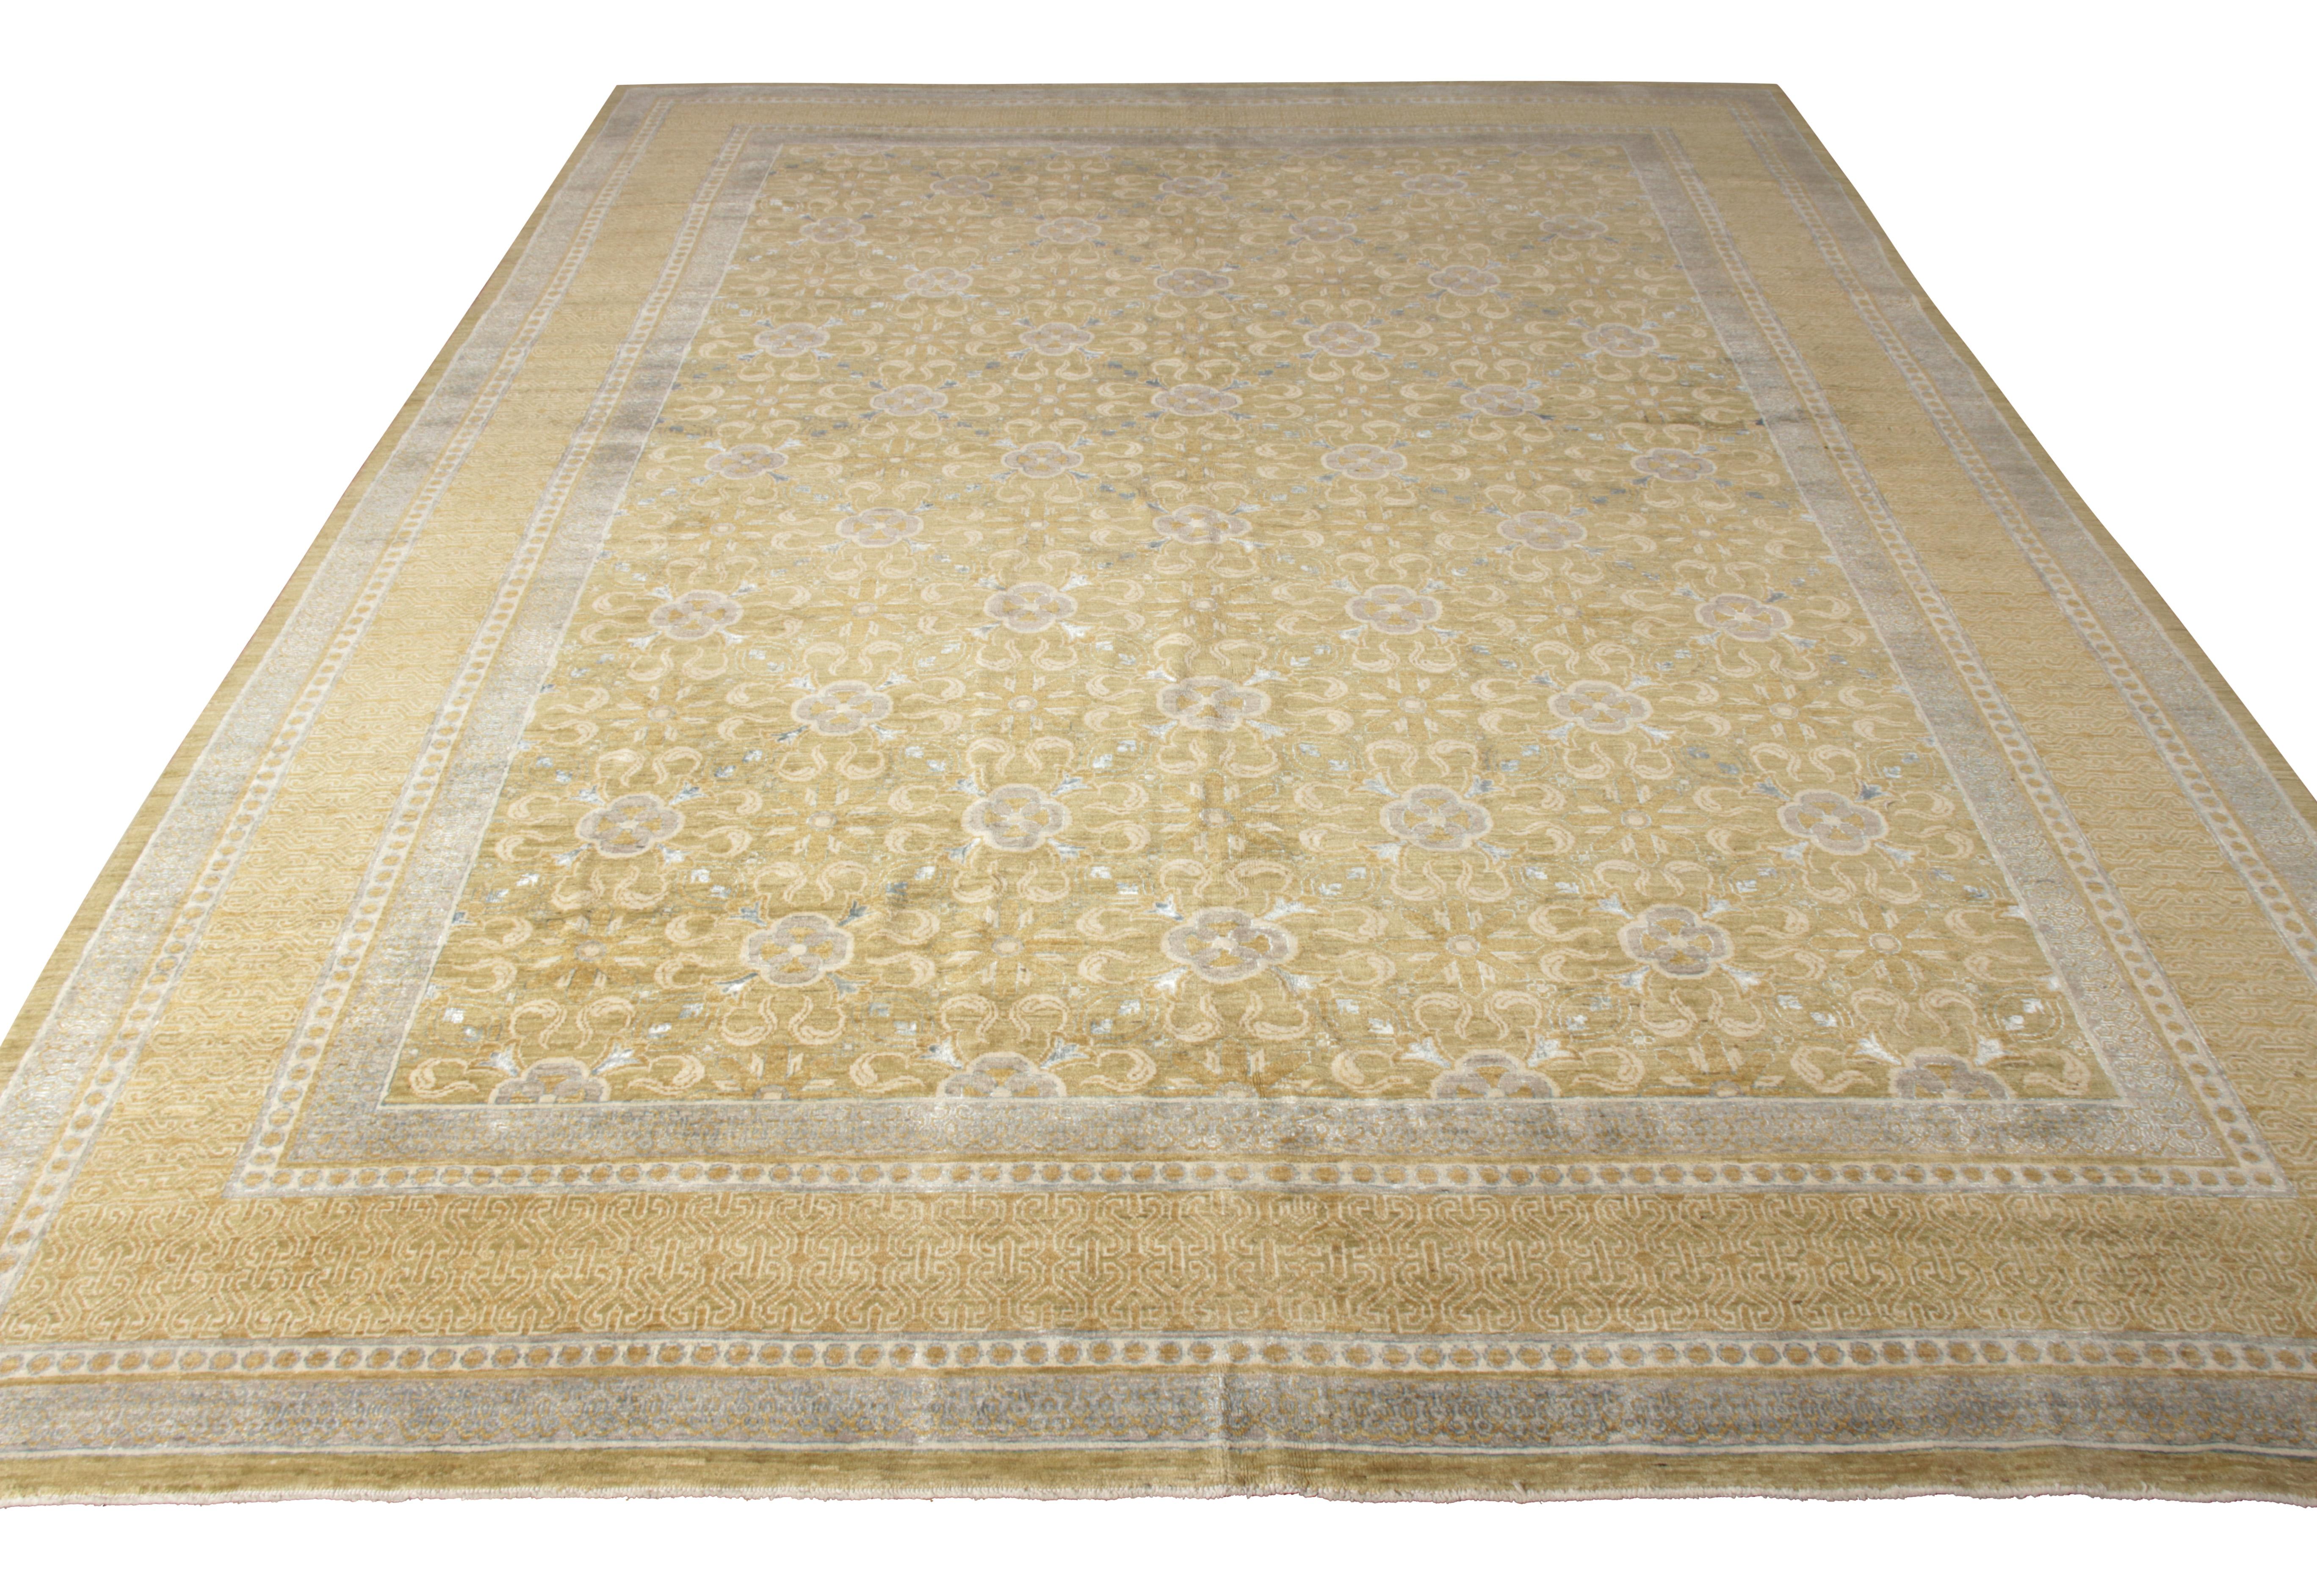 Coming from Rug & Kilim’s Modern Classics collection, this 9x12 drawing combines transitional and modern aesthetics in an expressive floral pattern accentuated by borders in alternating colours of pale blue and golden beige-brown for a captivating